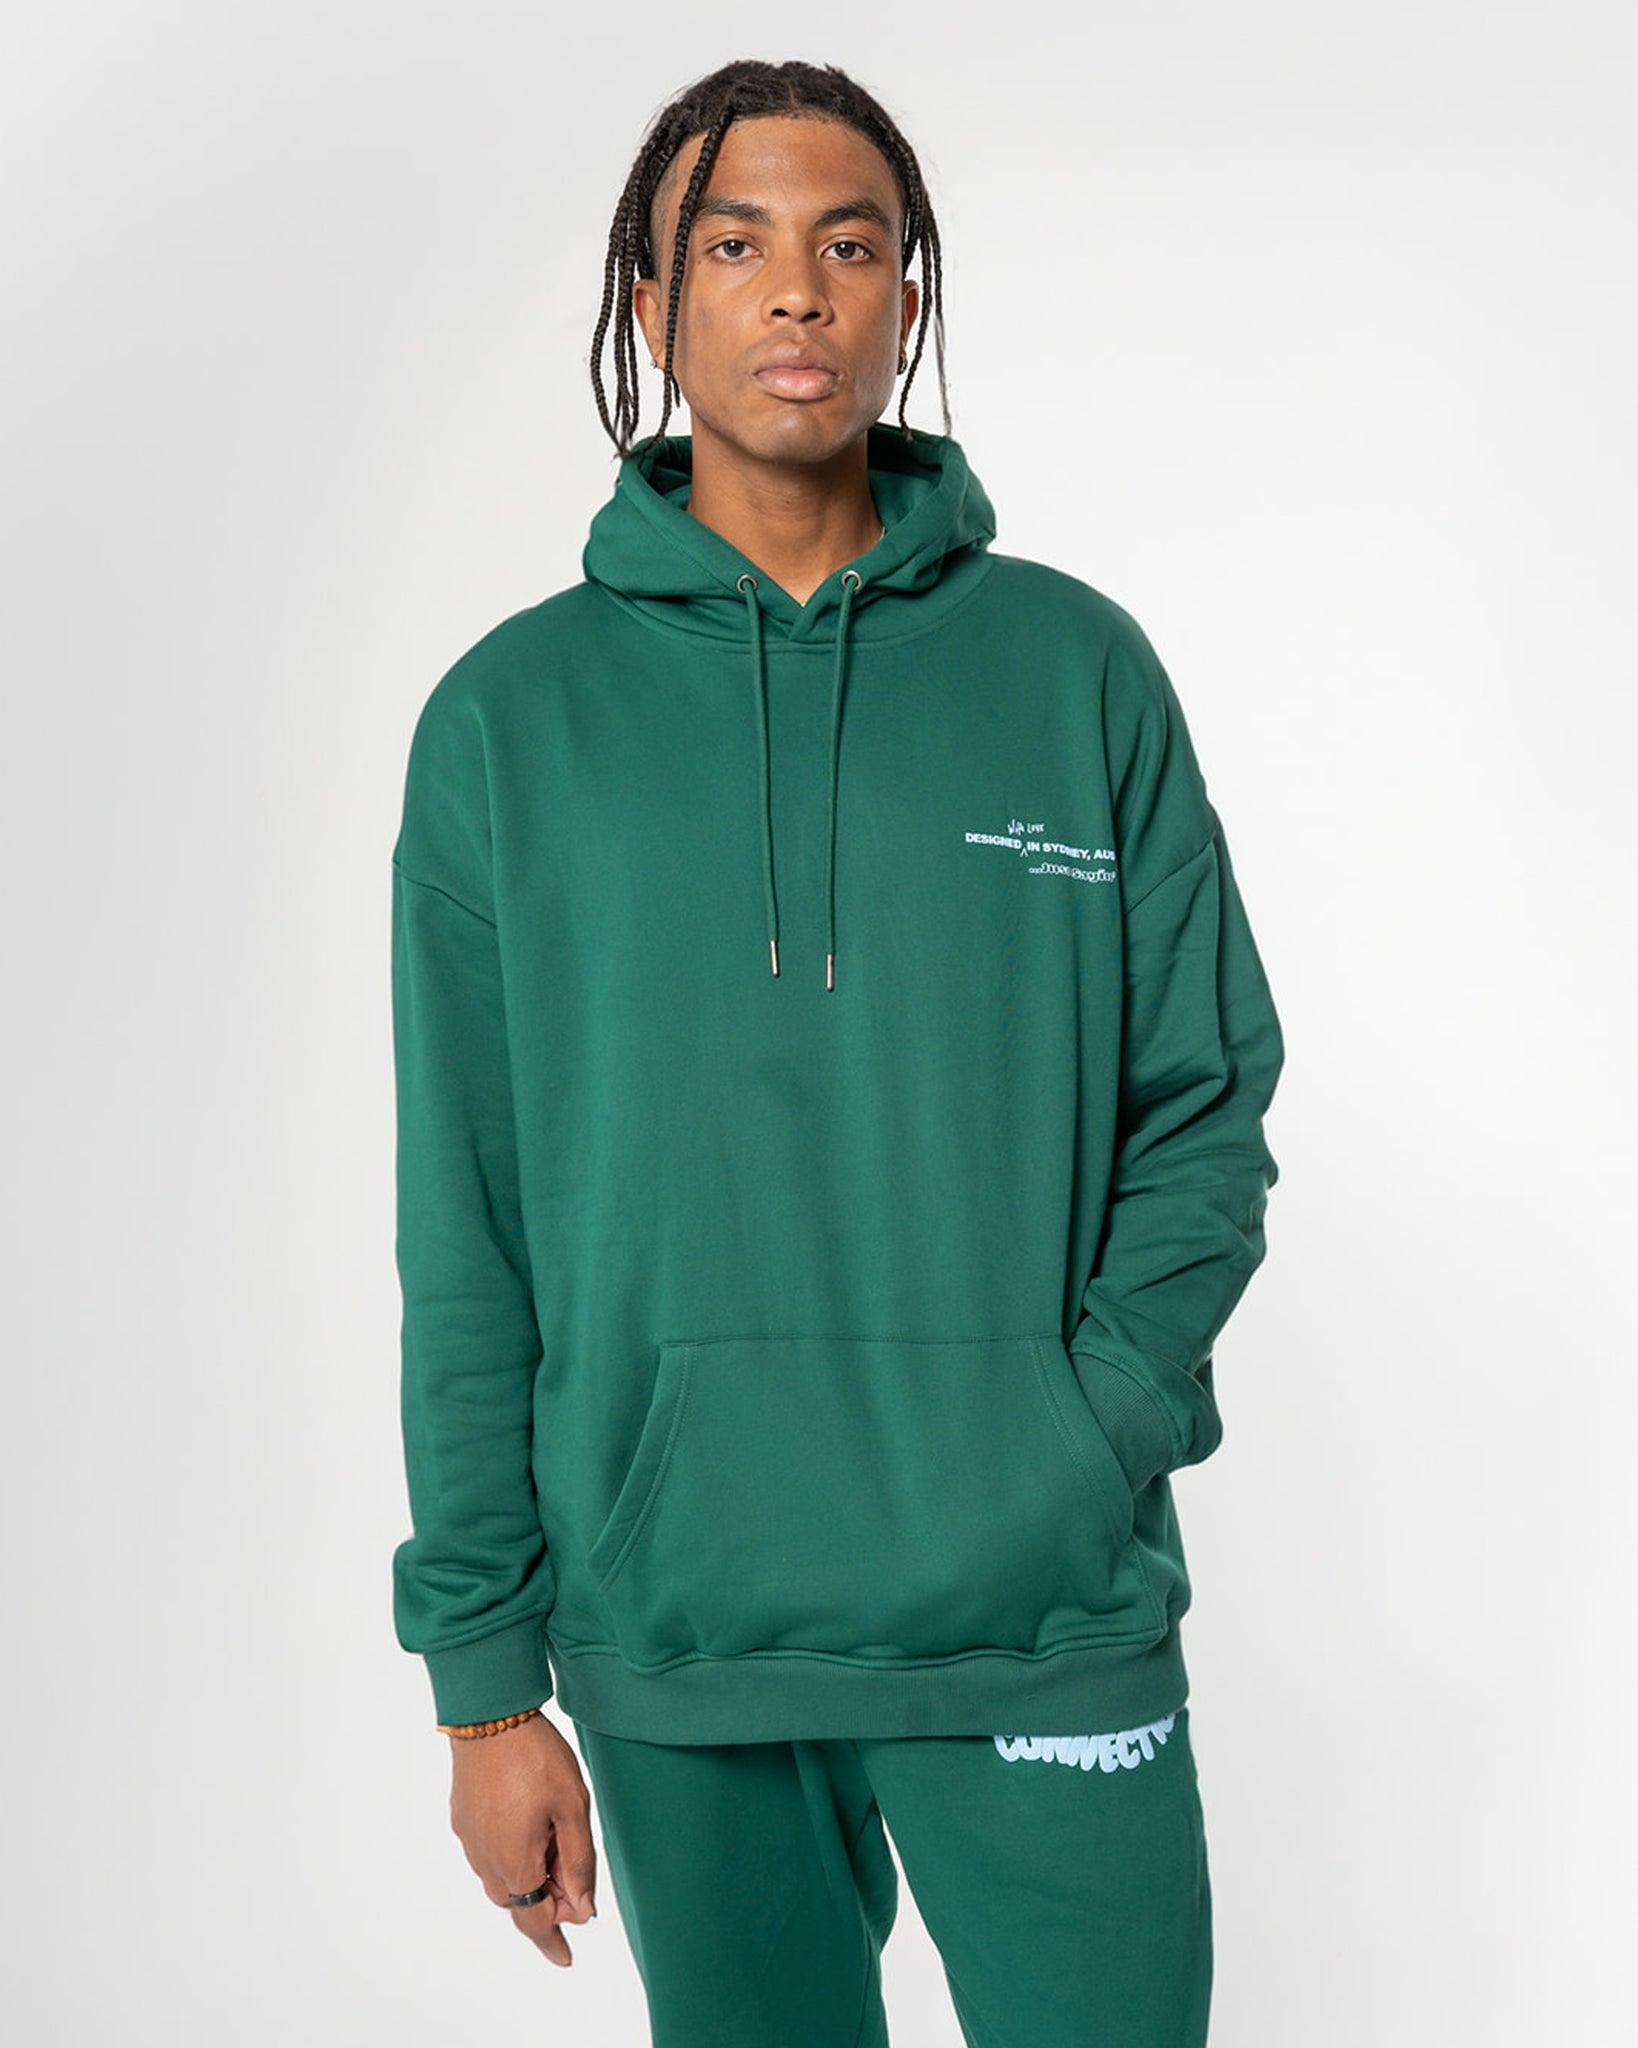 Human Connection Hoodie - Rain Forest